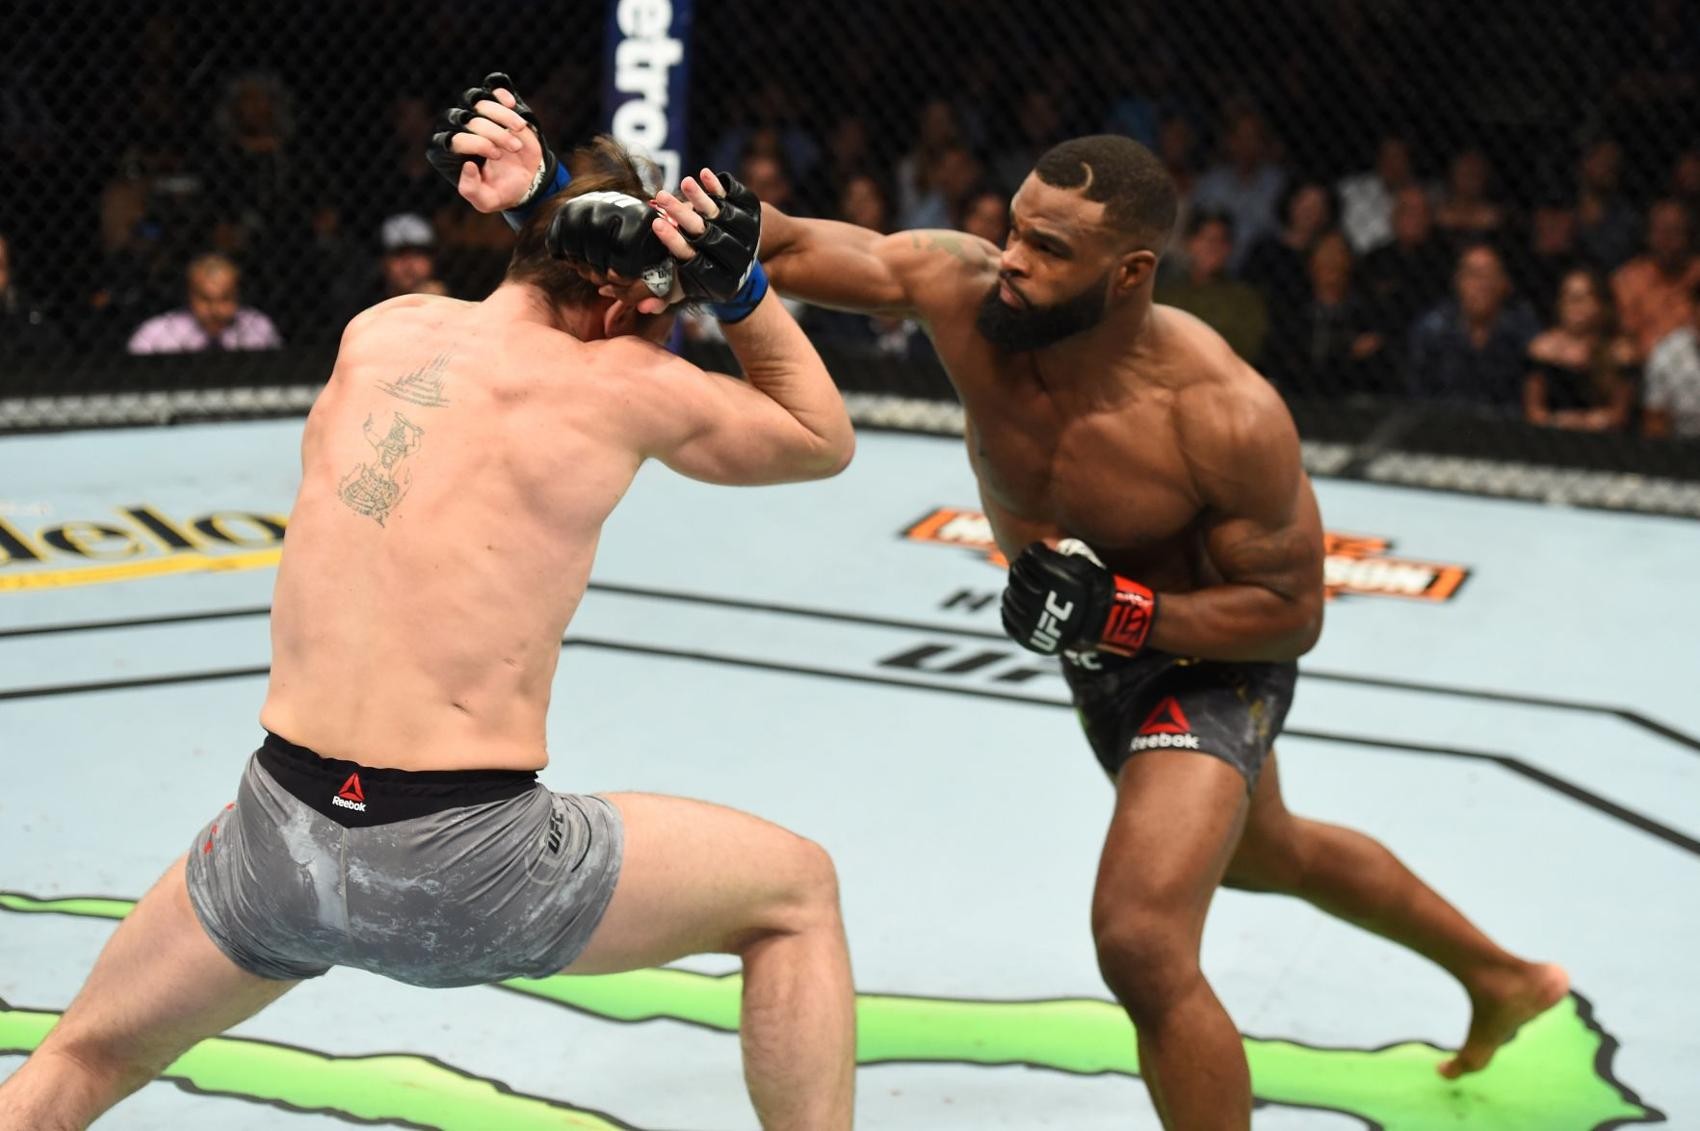 St. Louis' Woodley to make fifth UFC title defense